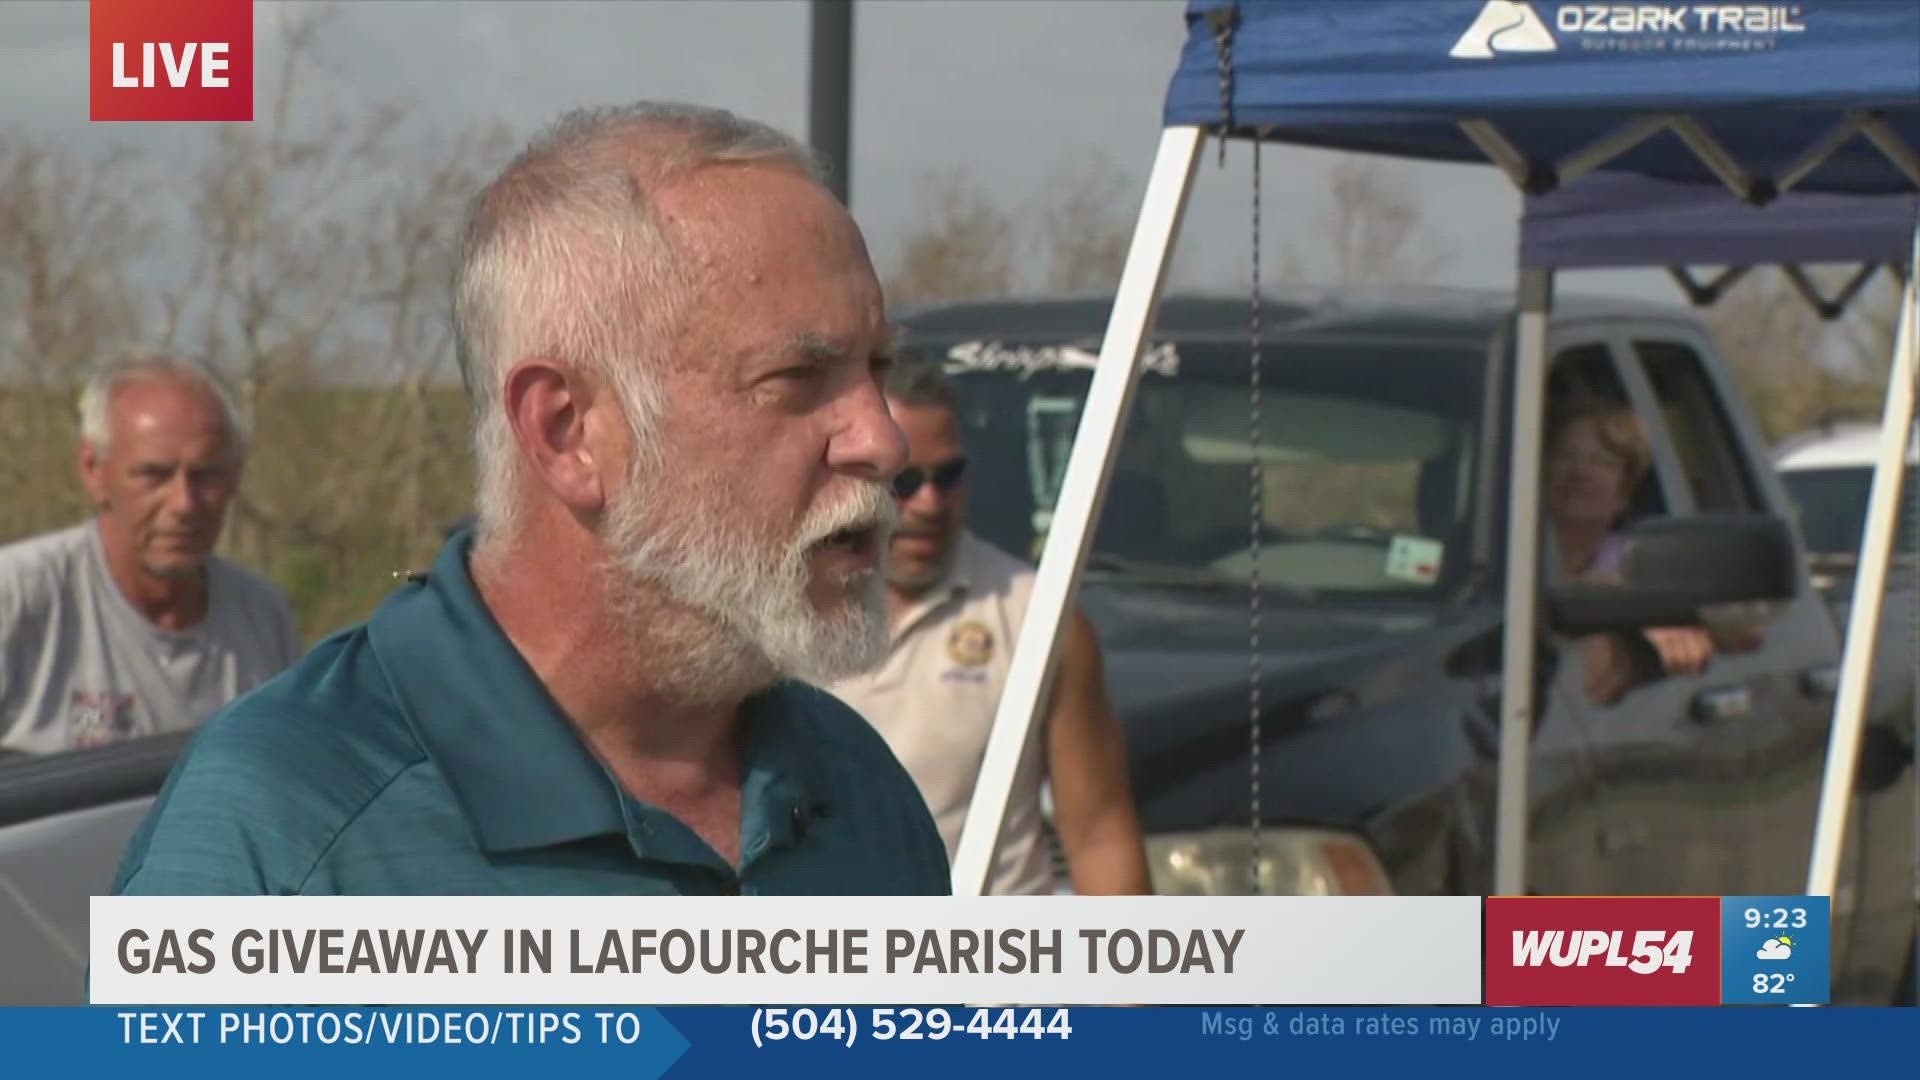 Dozens of people are lining up for free gasoline in Lafourche Parish after Hurricane Ida.